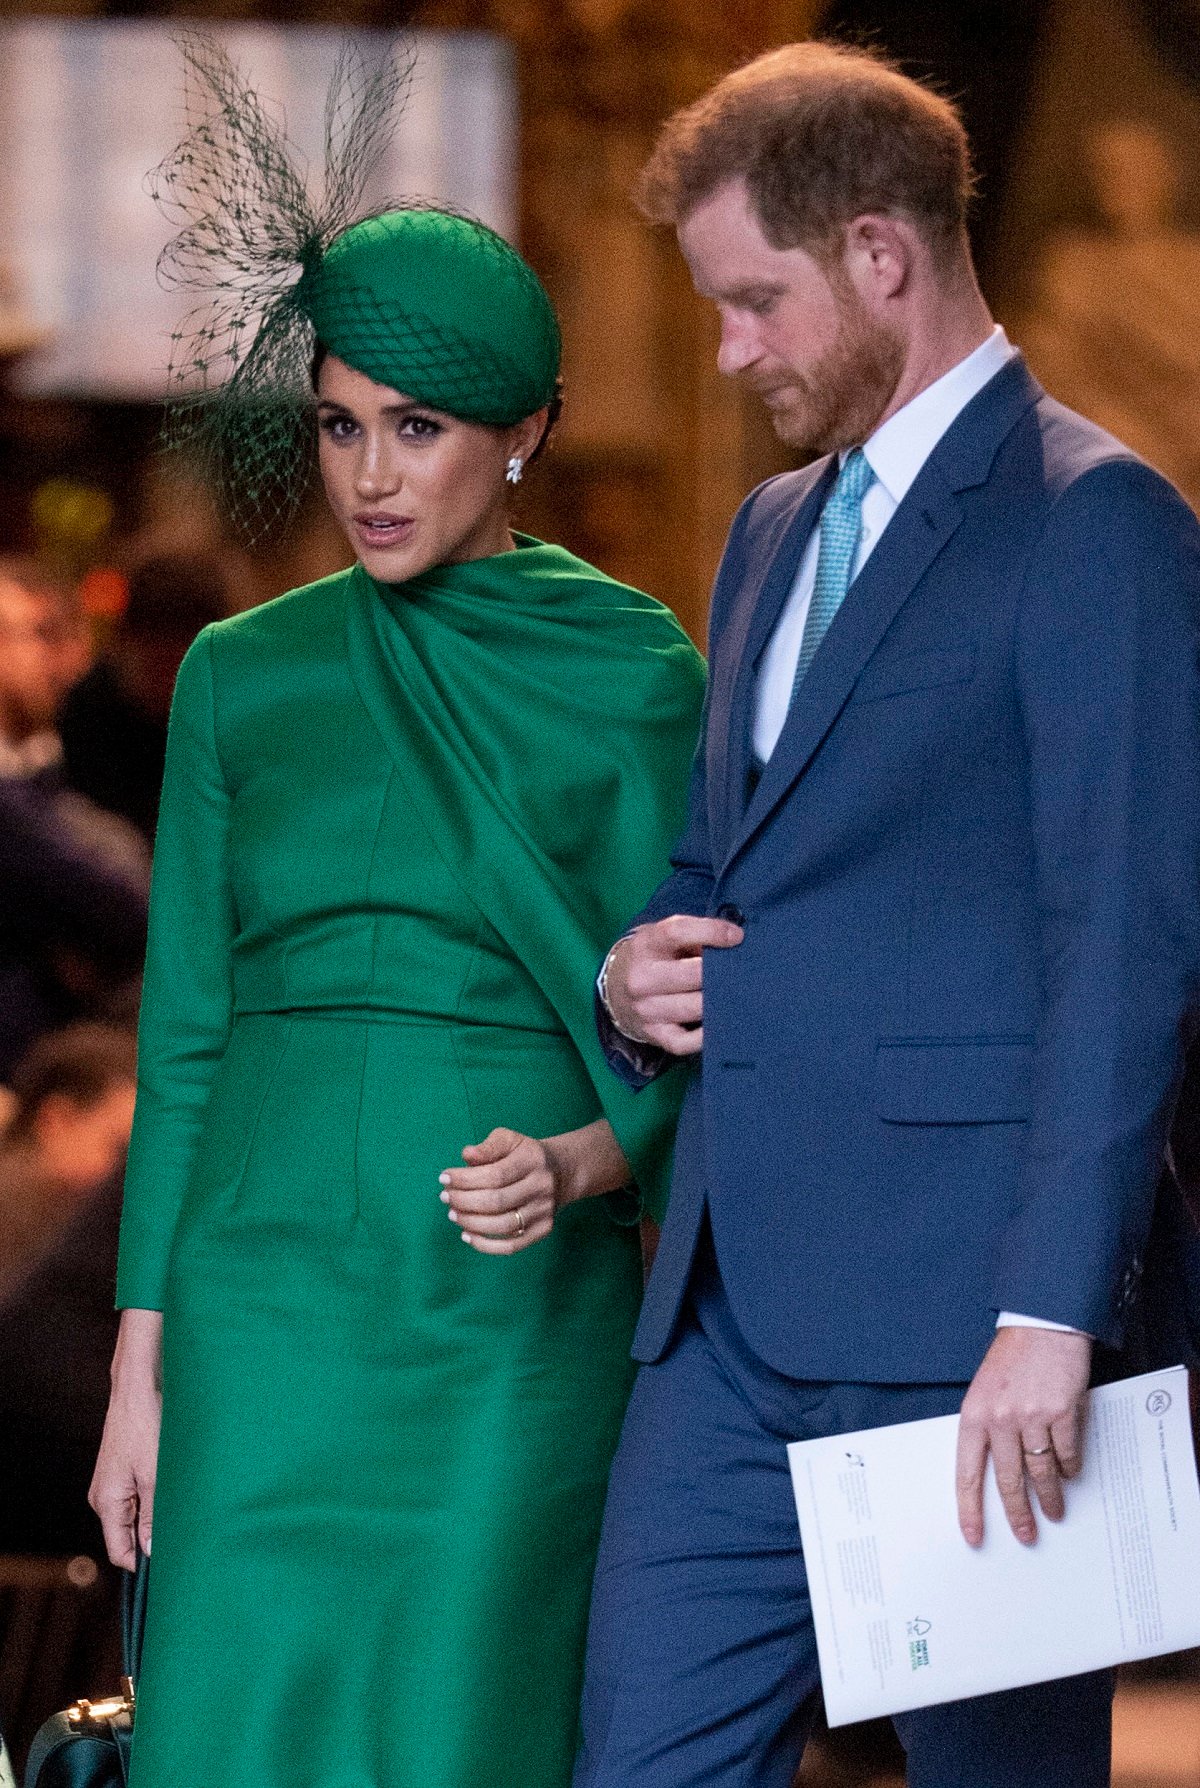 Meghan Markle and Prince Harry at the Commonwealth Day Service 2020